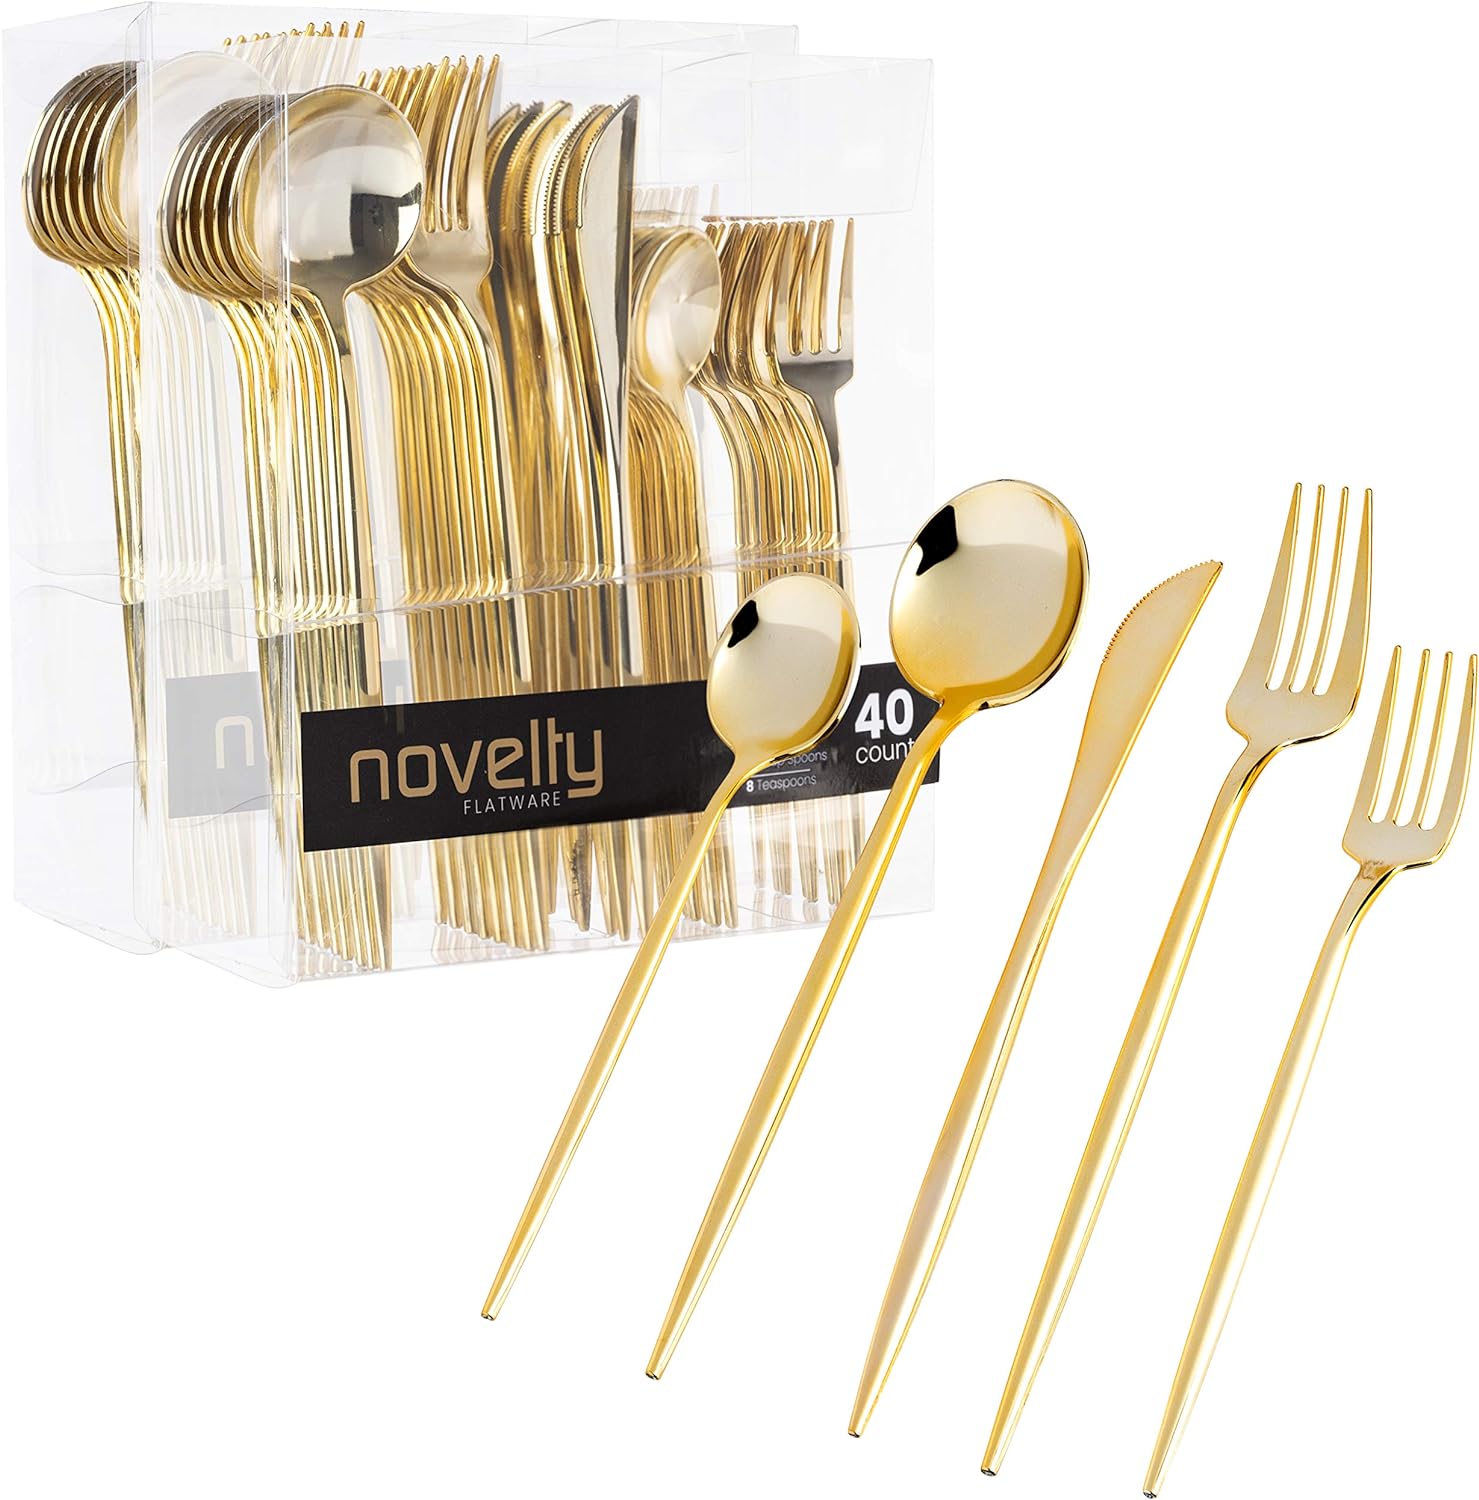 Novelty Modern Flatware Cutlery Disposable Plastic Combo Set 80 Count Luxury Gold, Service for 16